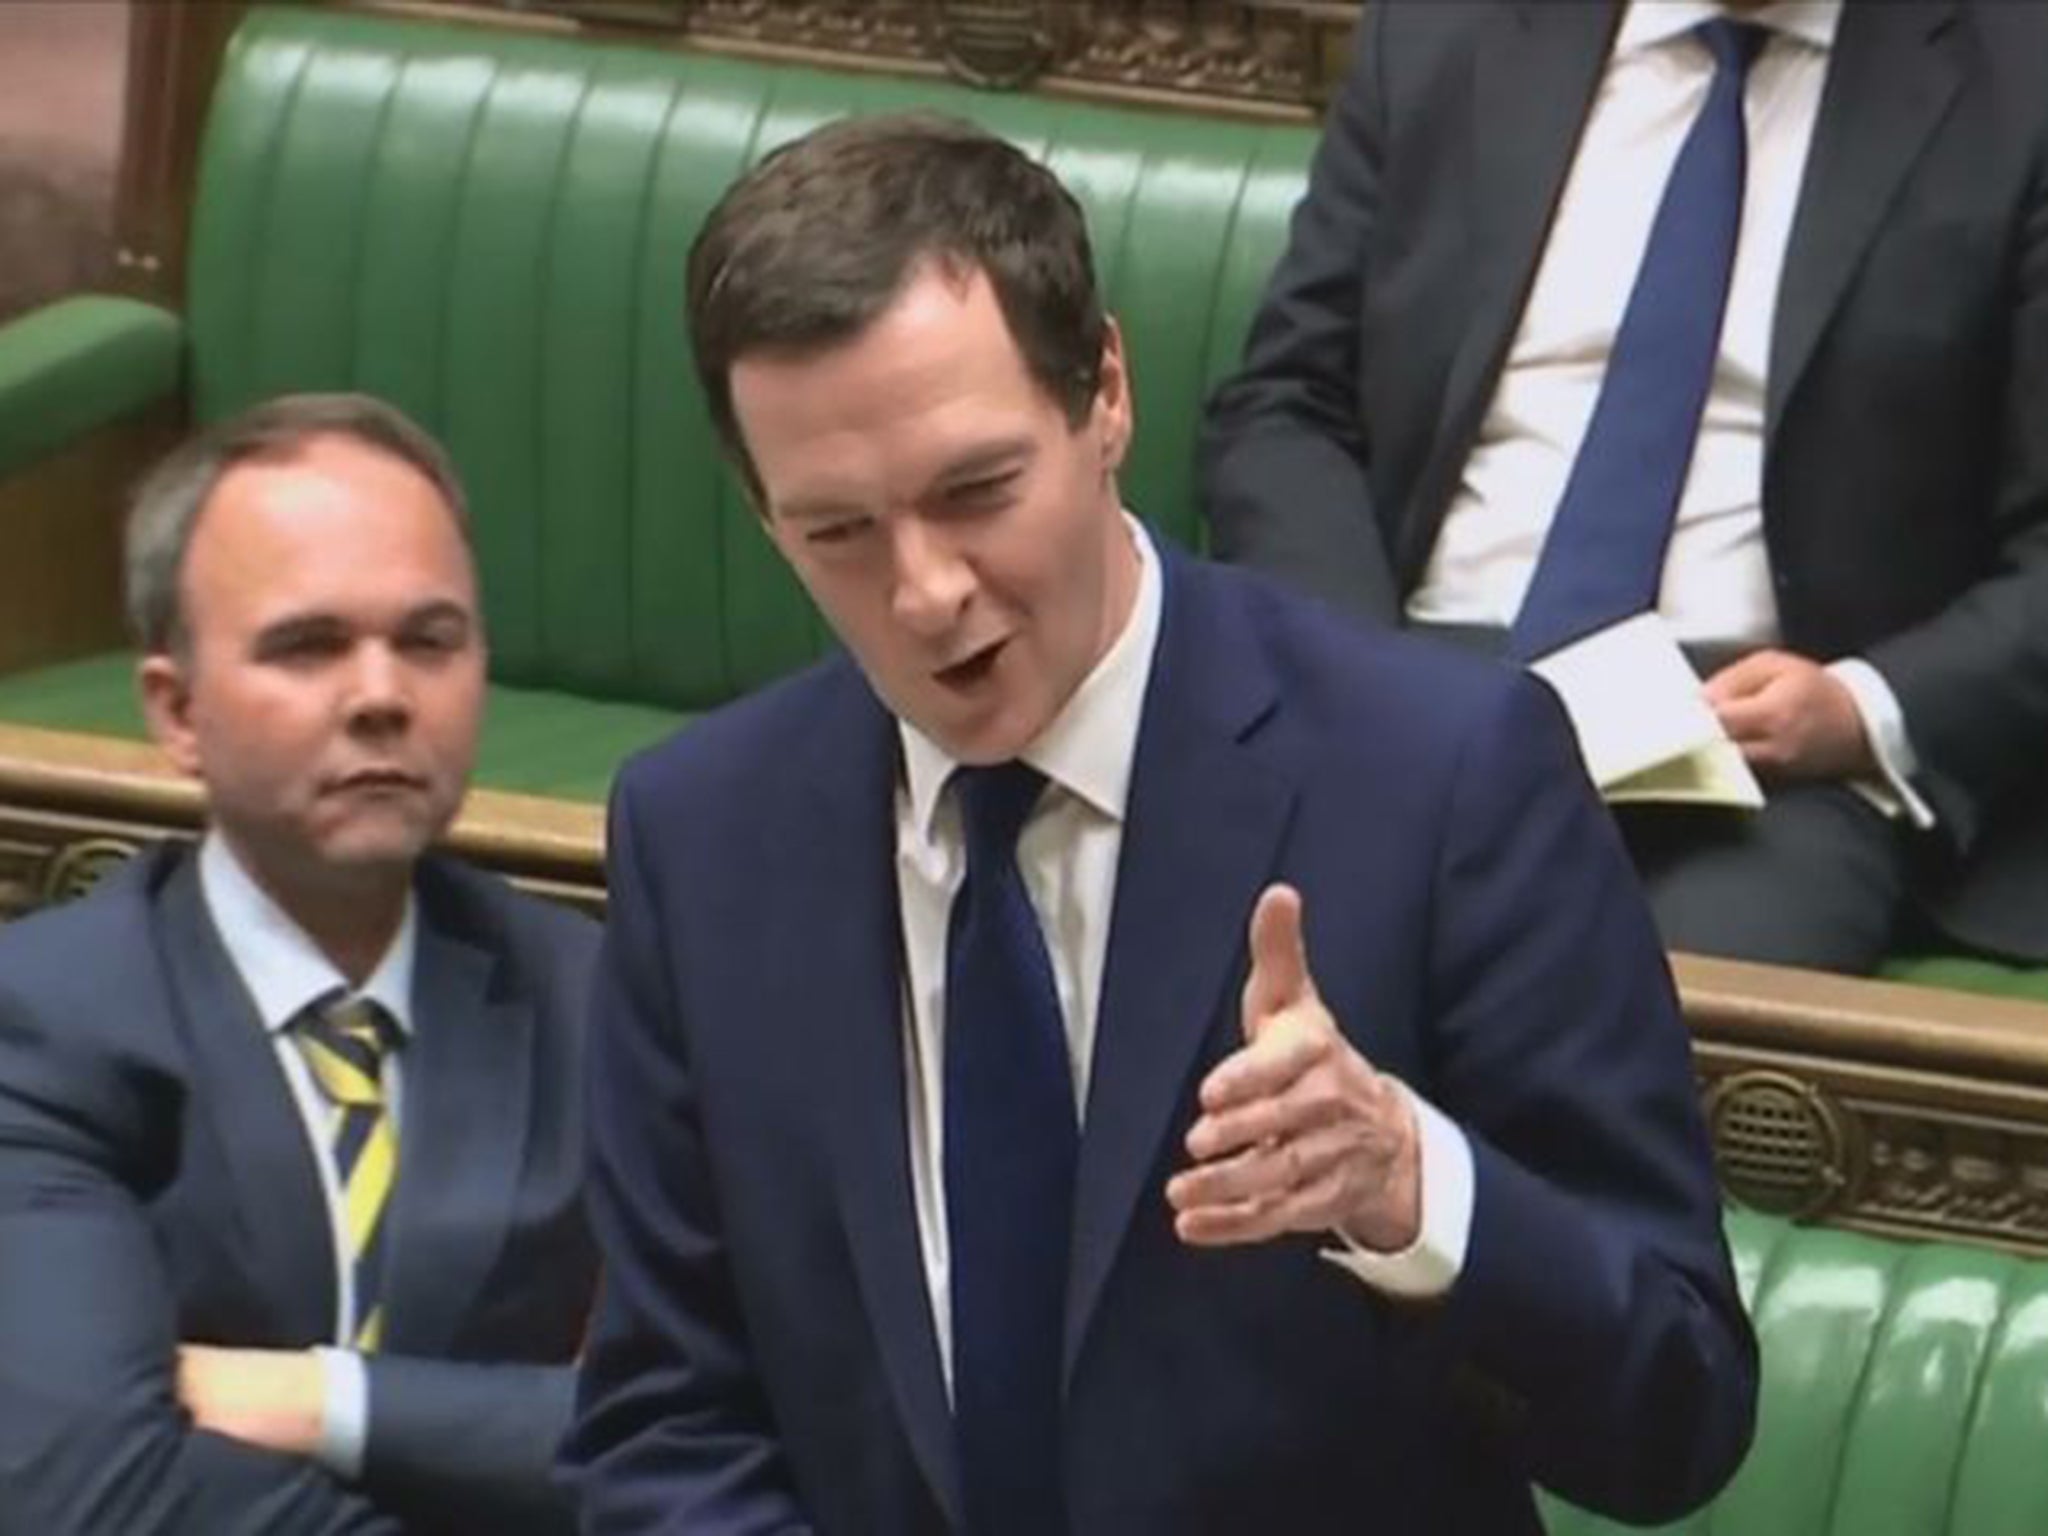 George Osborne makes his debut at Prime Minister's Questions today